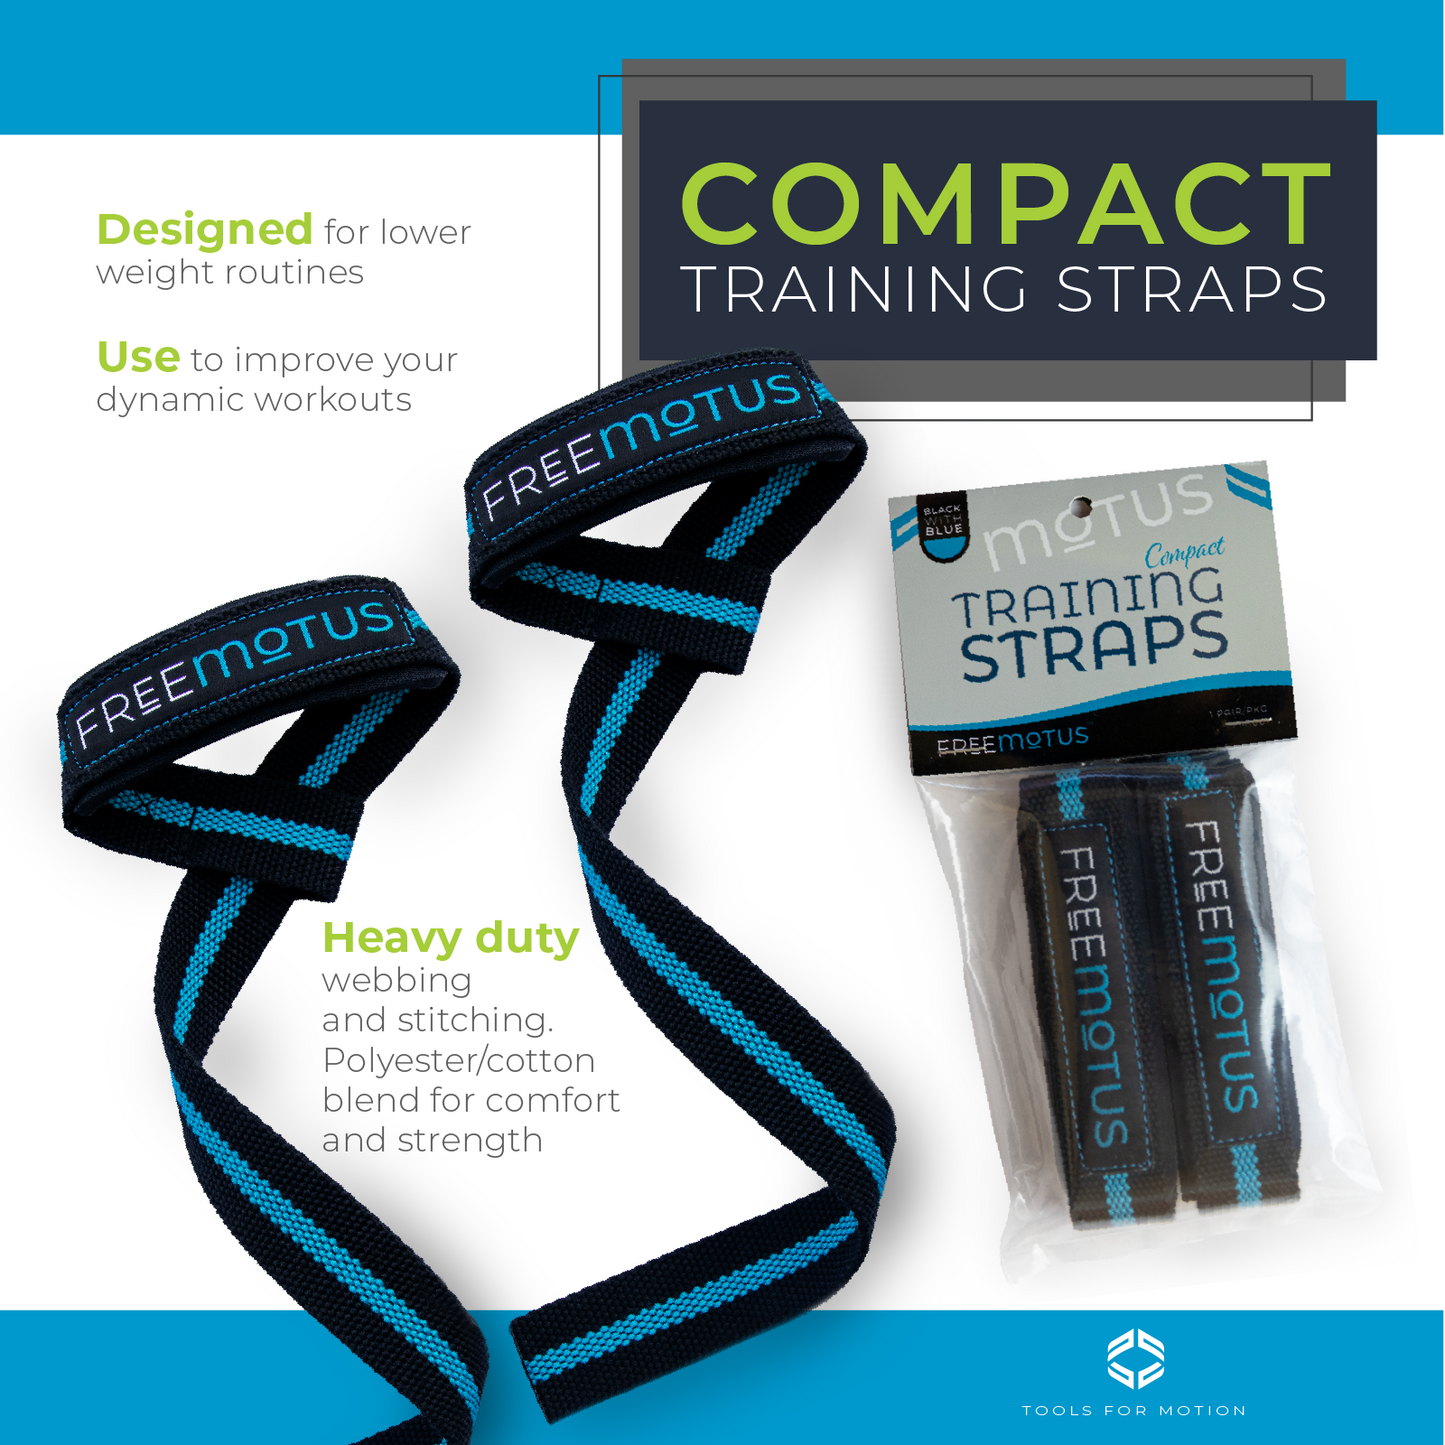 Compact Training Straps